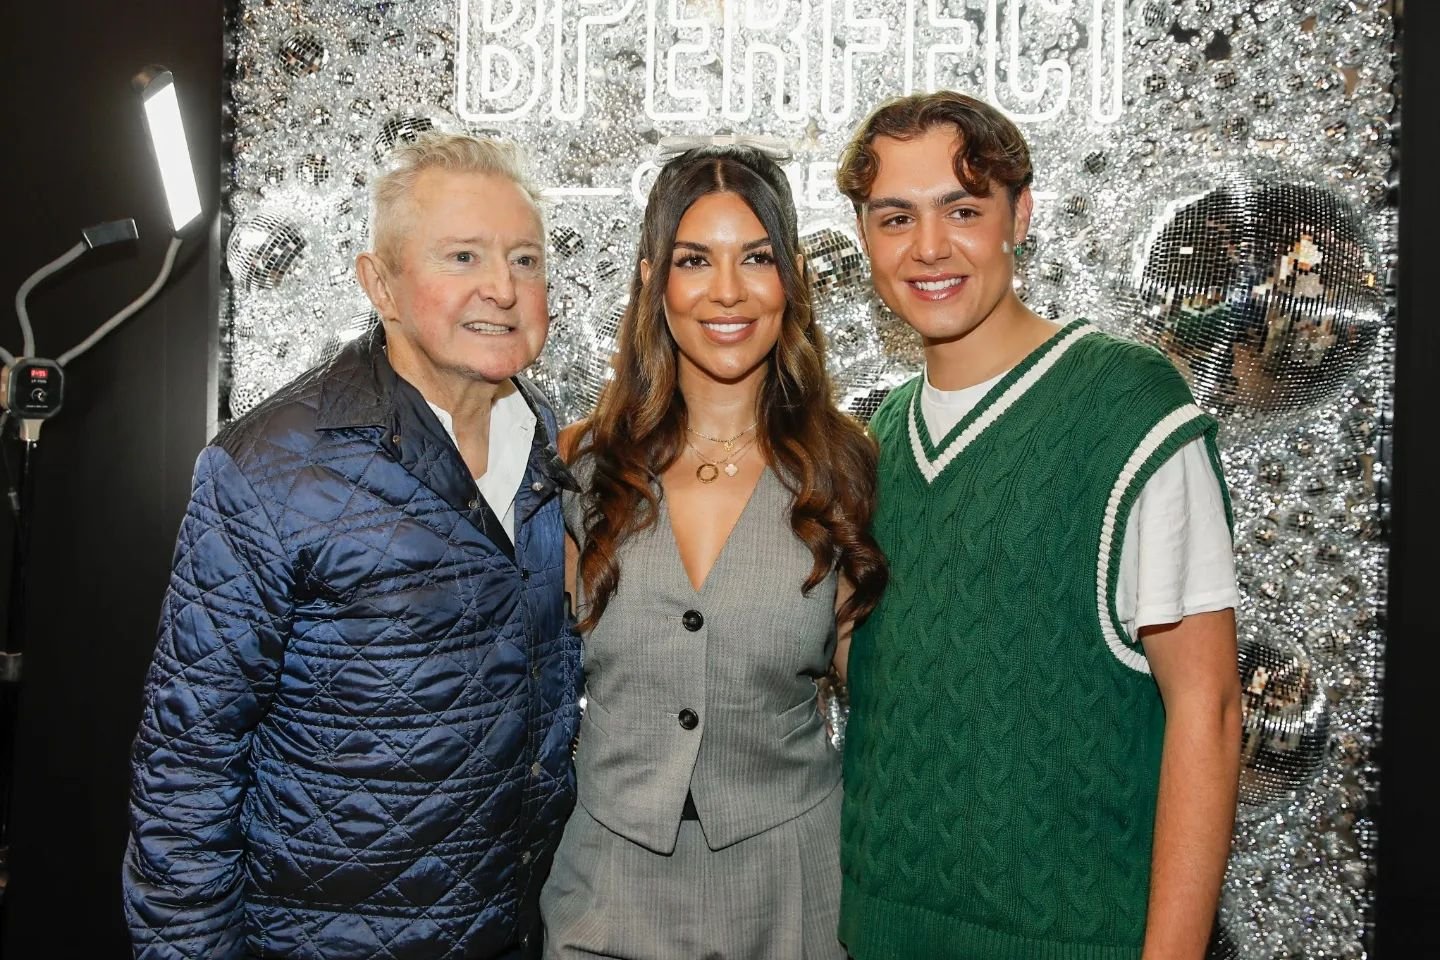 Fans eagerly gathered at CastleCourt Shopping Centre this evening to catch a glimpse of celebrities attending the launch of BPerfect's Belfast store. Some of those in attendance were Celebrity Big Brother stars Louis Walsh, Ekin-Su and Bradley Riches